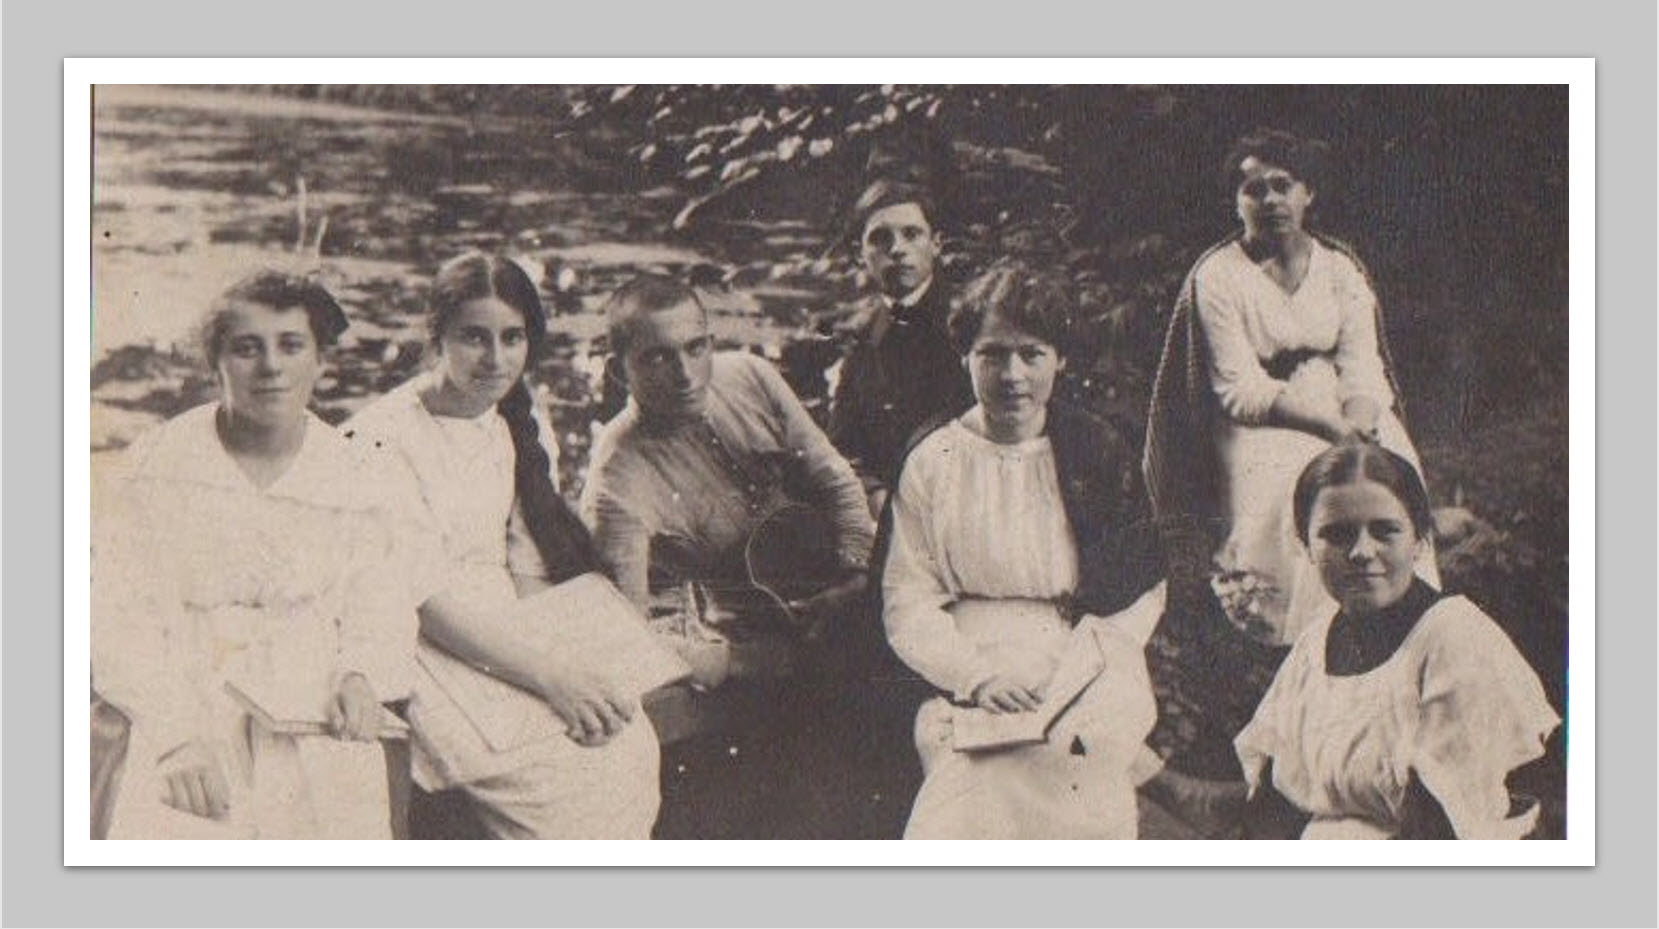 Ben Fishman from Mervits hanging with Shulman sisters from Mlynov along Ikva River, before 1920